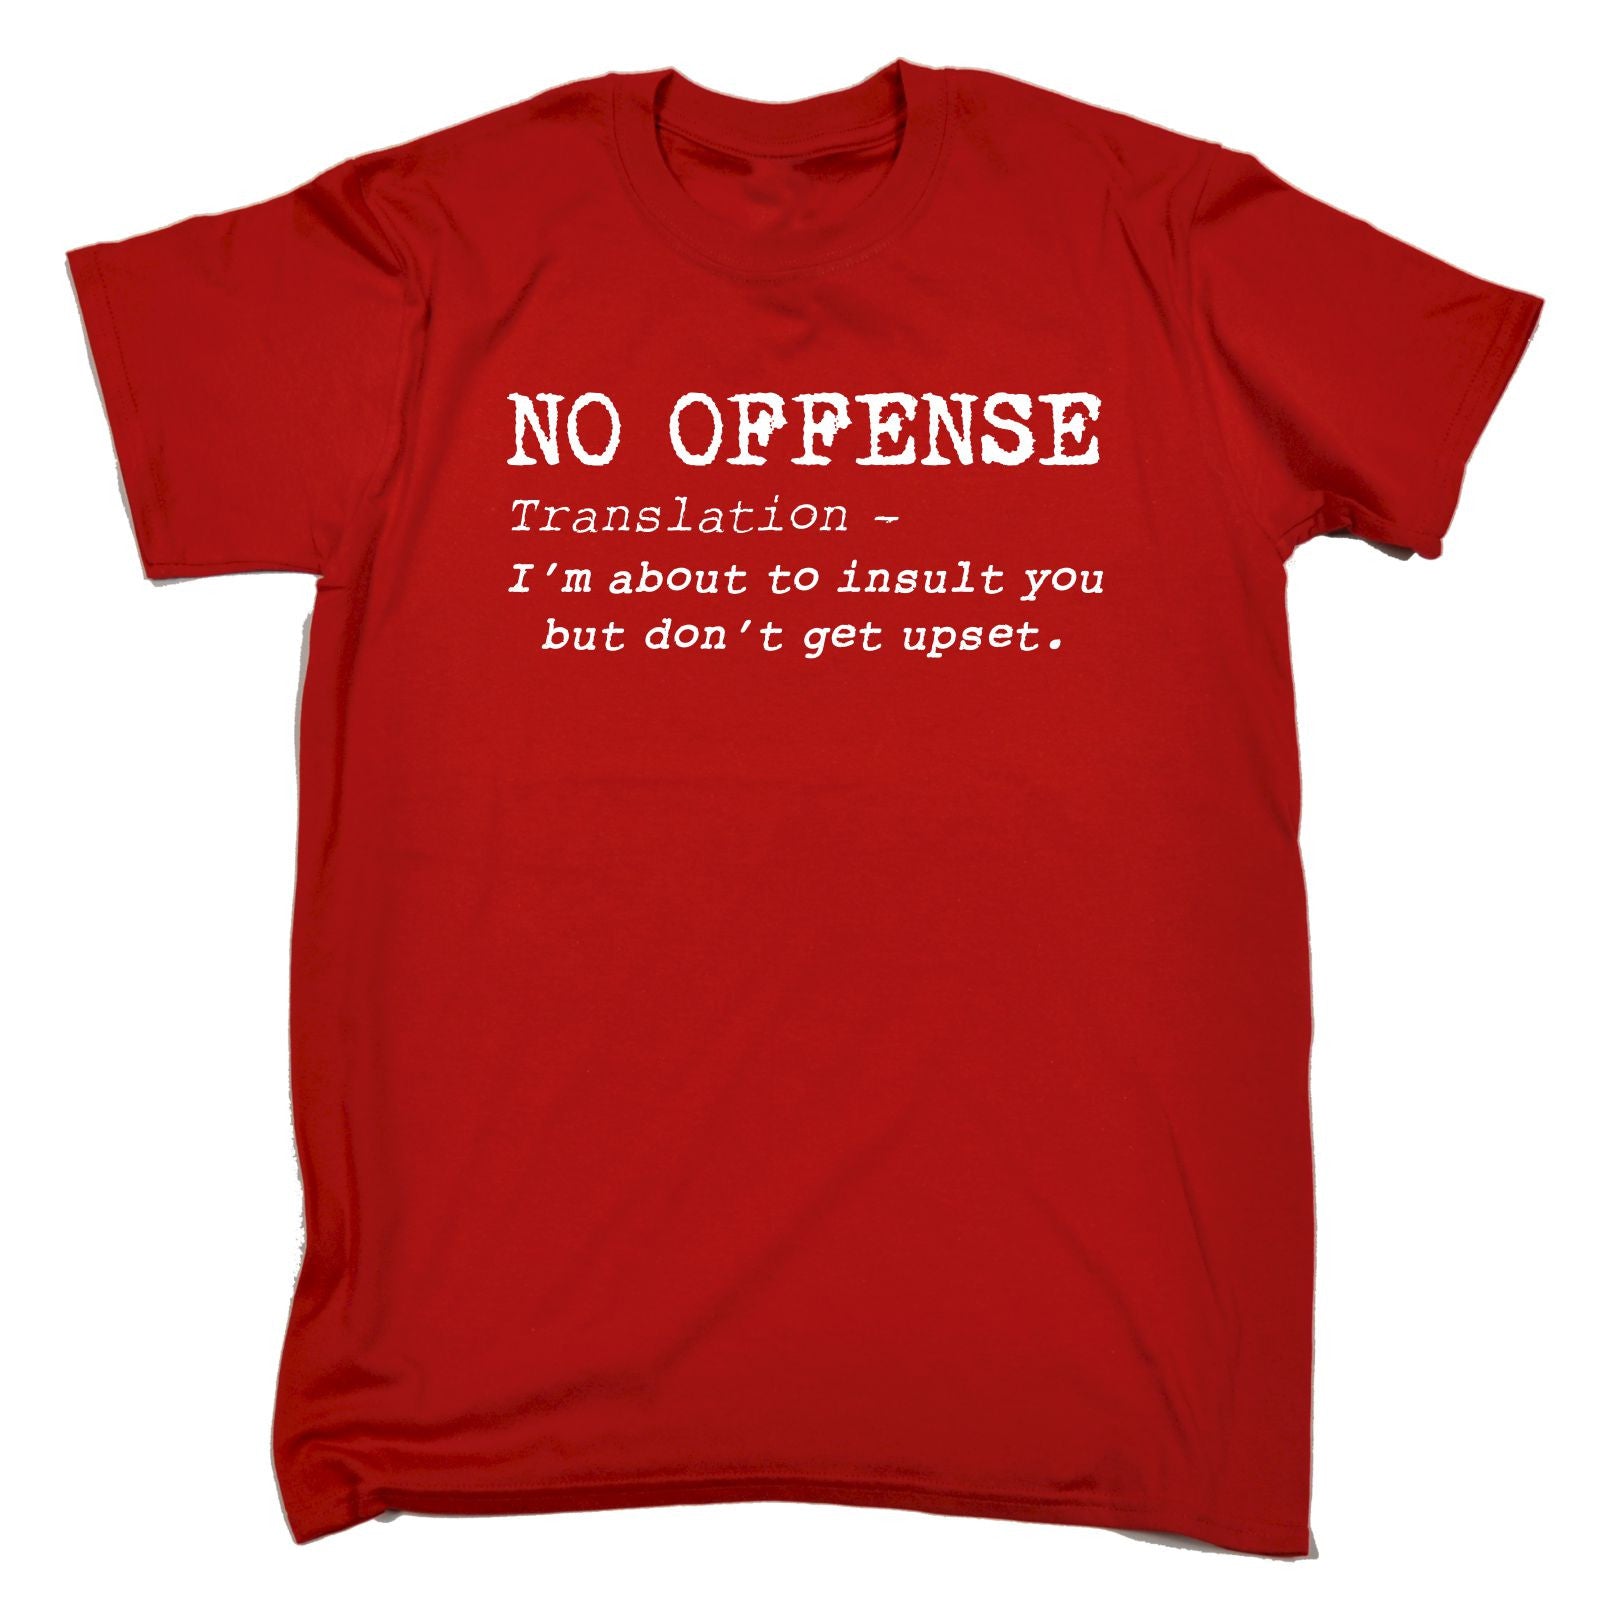 No Offense T Shirt Funny Offensive Birthday Present Tee Top Joke Funny T 123t Ebay